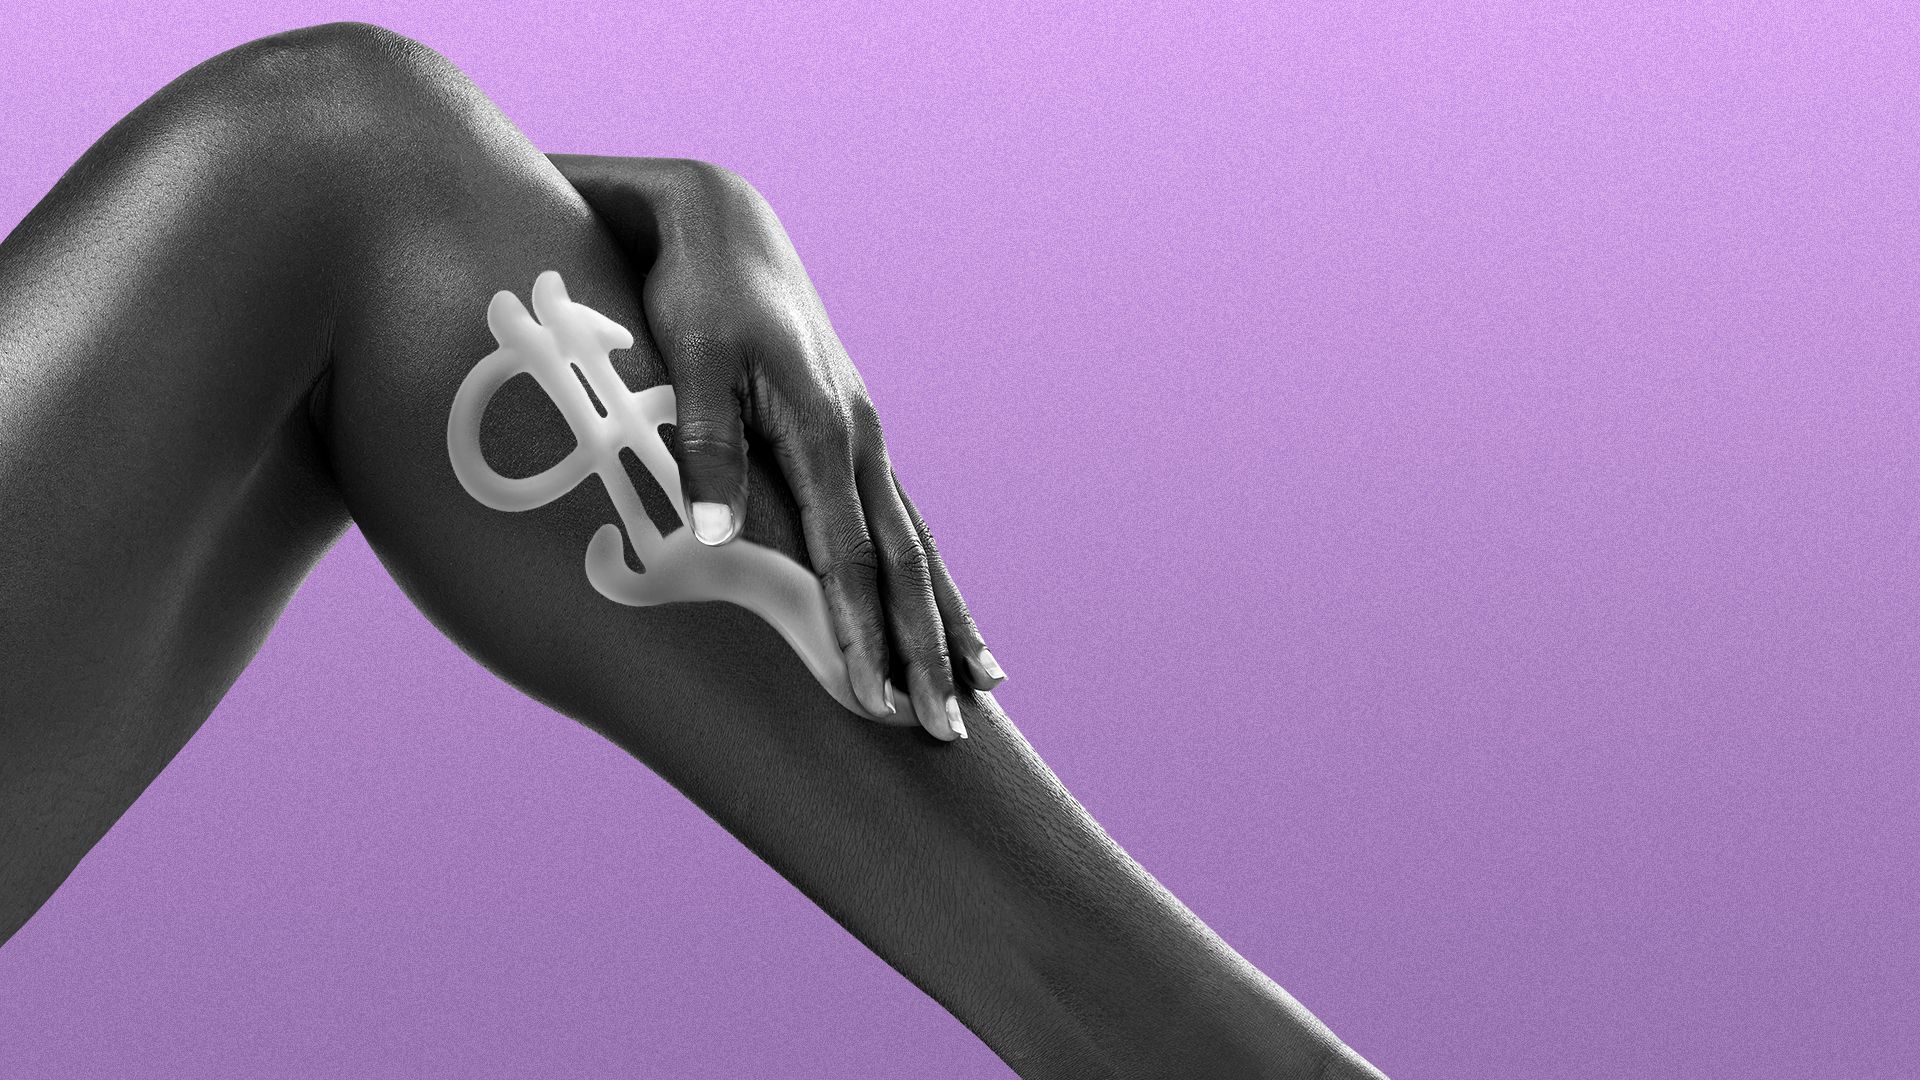 Illustration of a woman applying cream shaped like a dollar sign onto her leg.